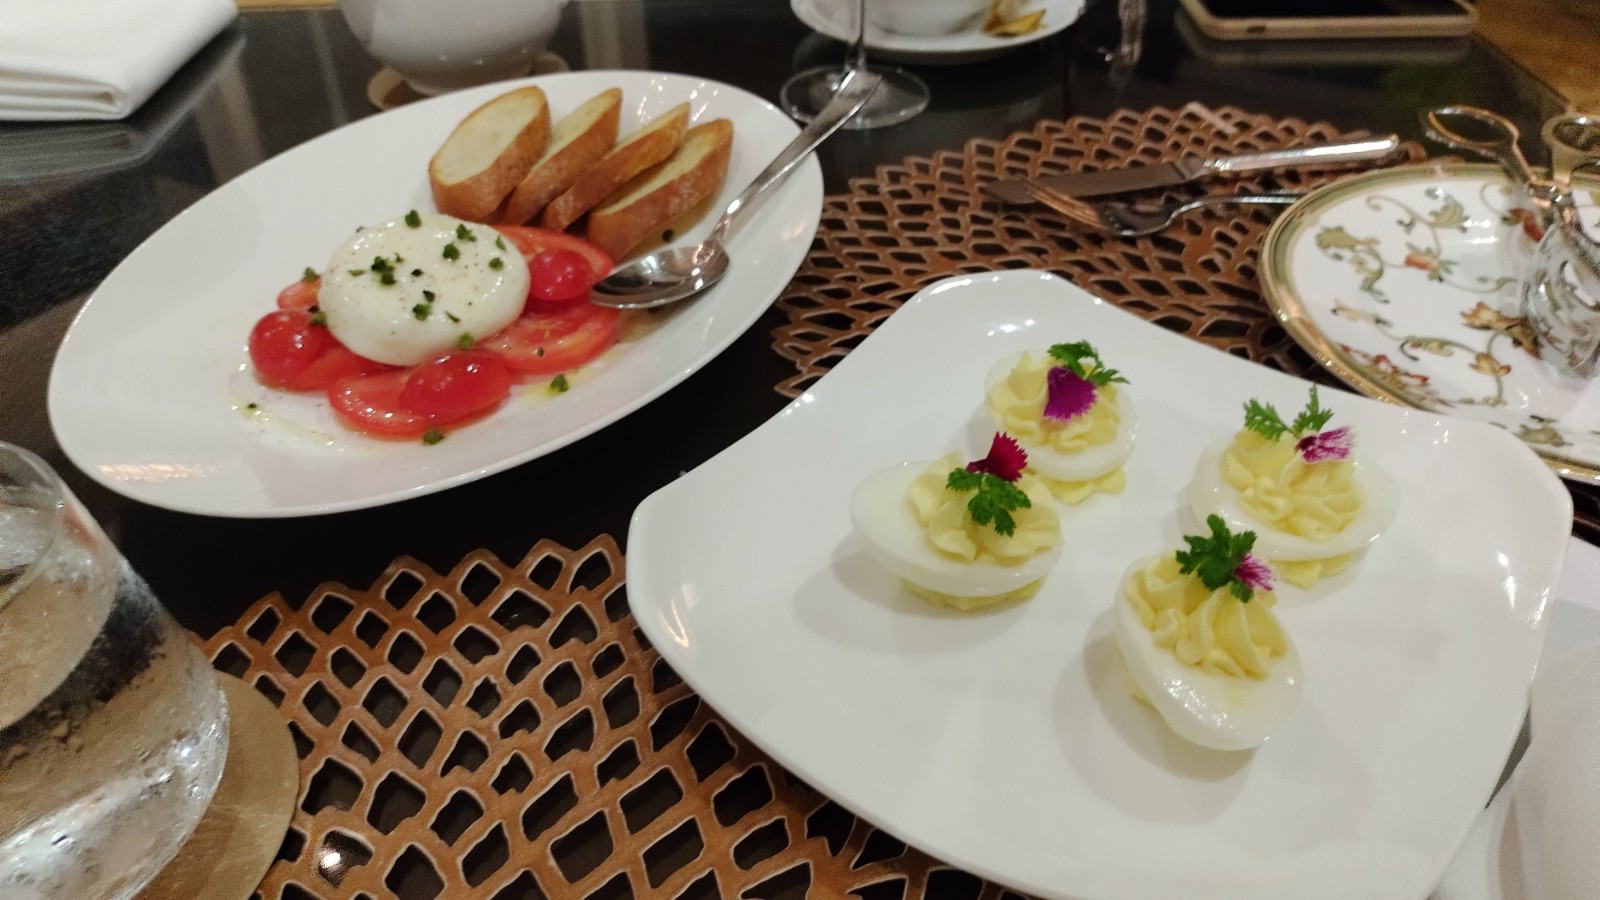 PICTURE OF THE DEVILED EGGS AND TOMATO AND BURATA